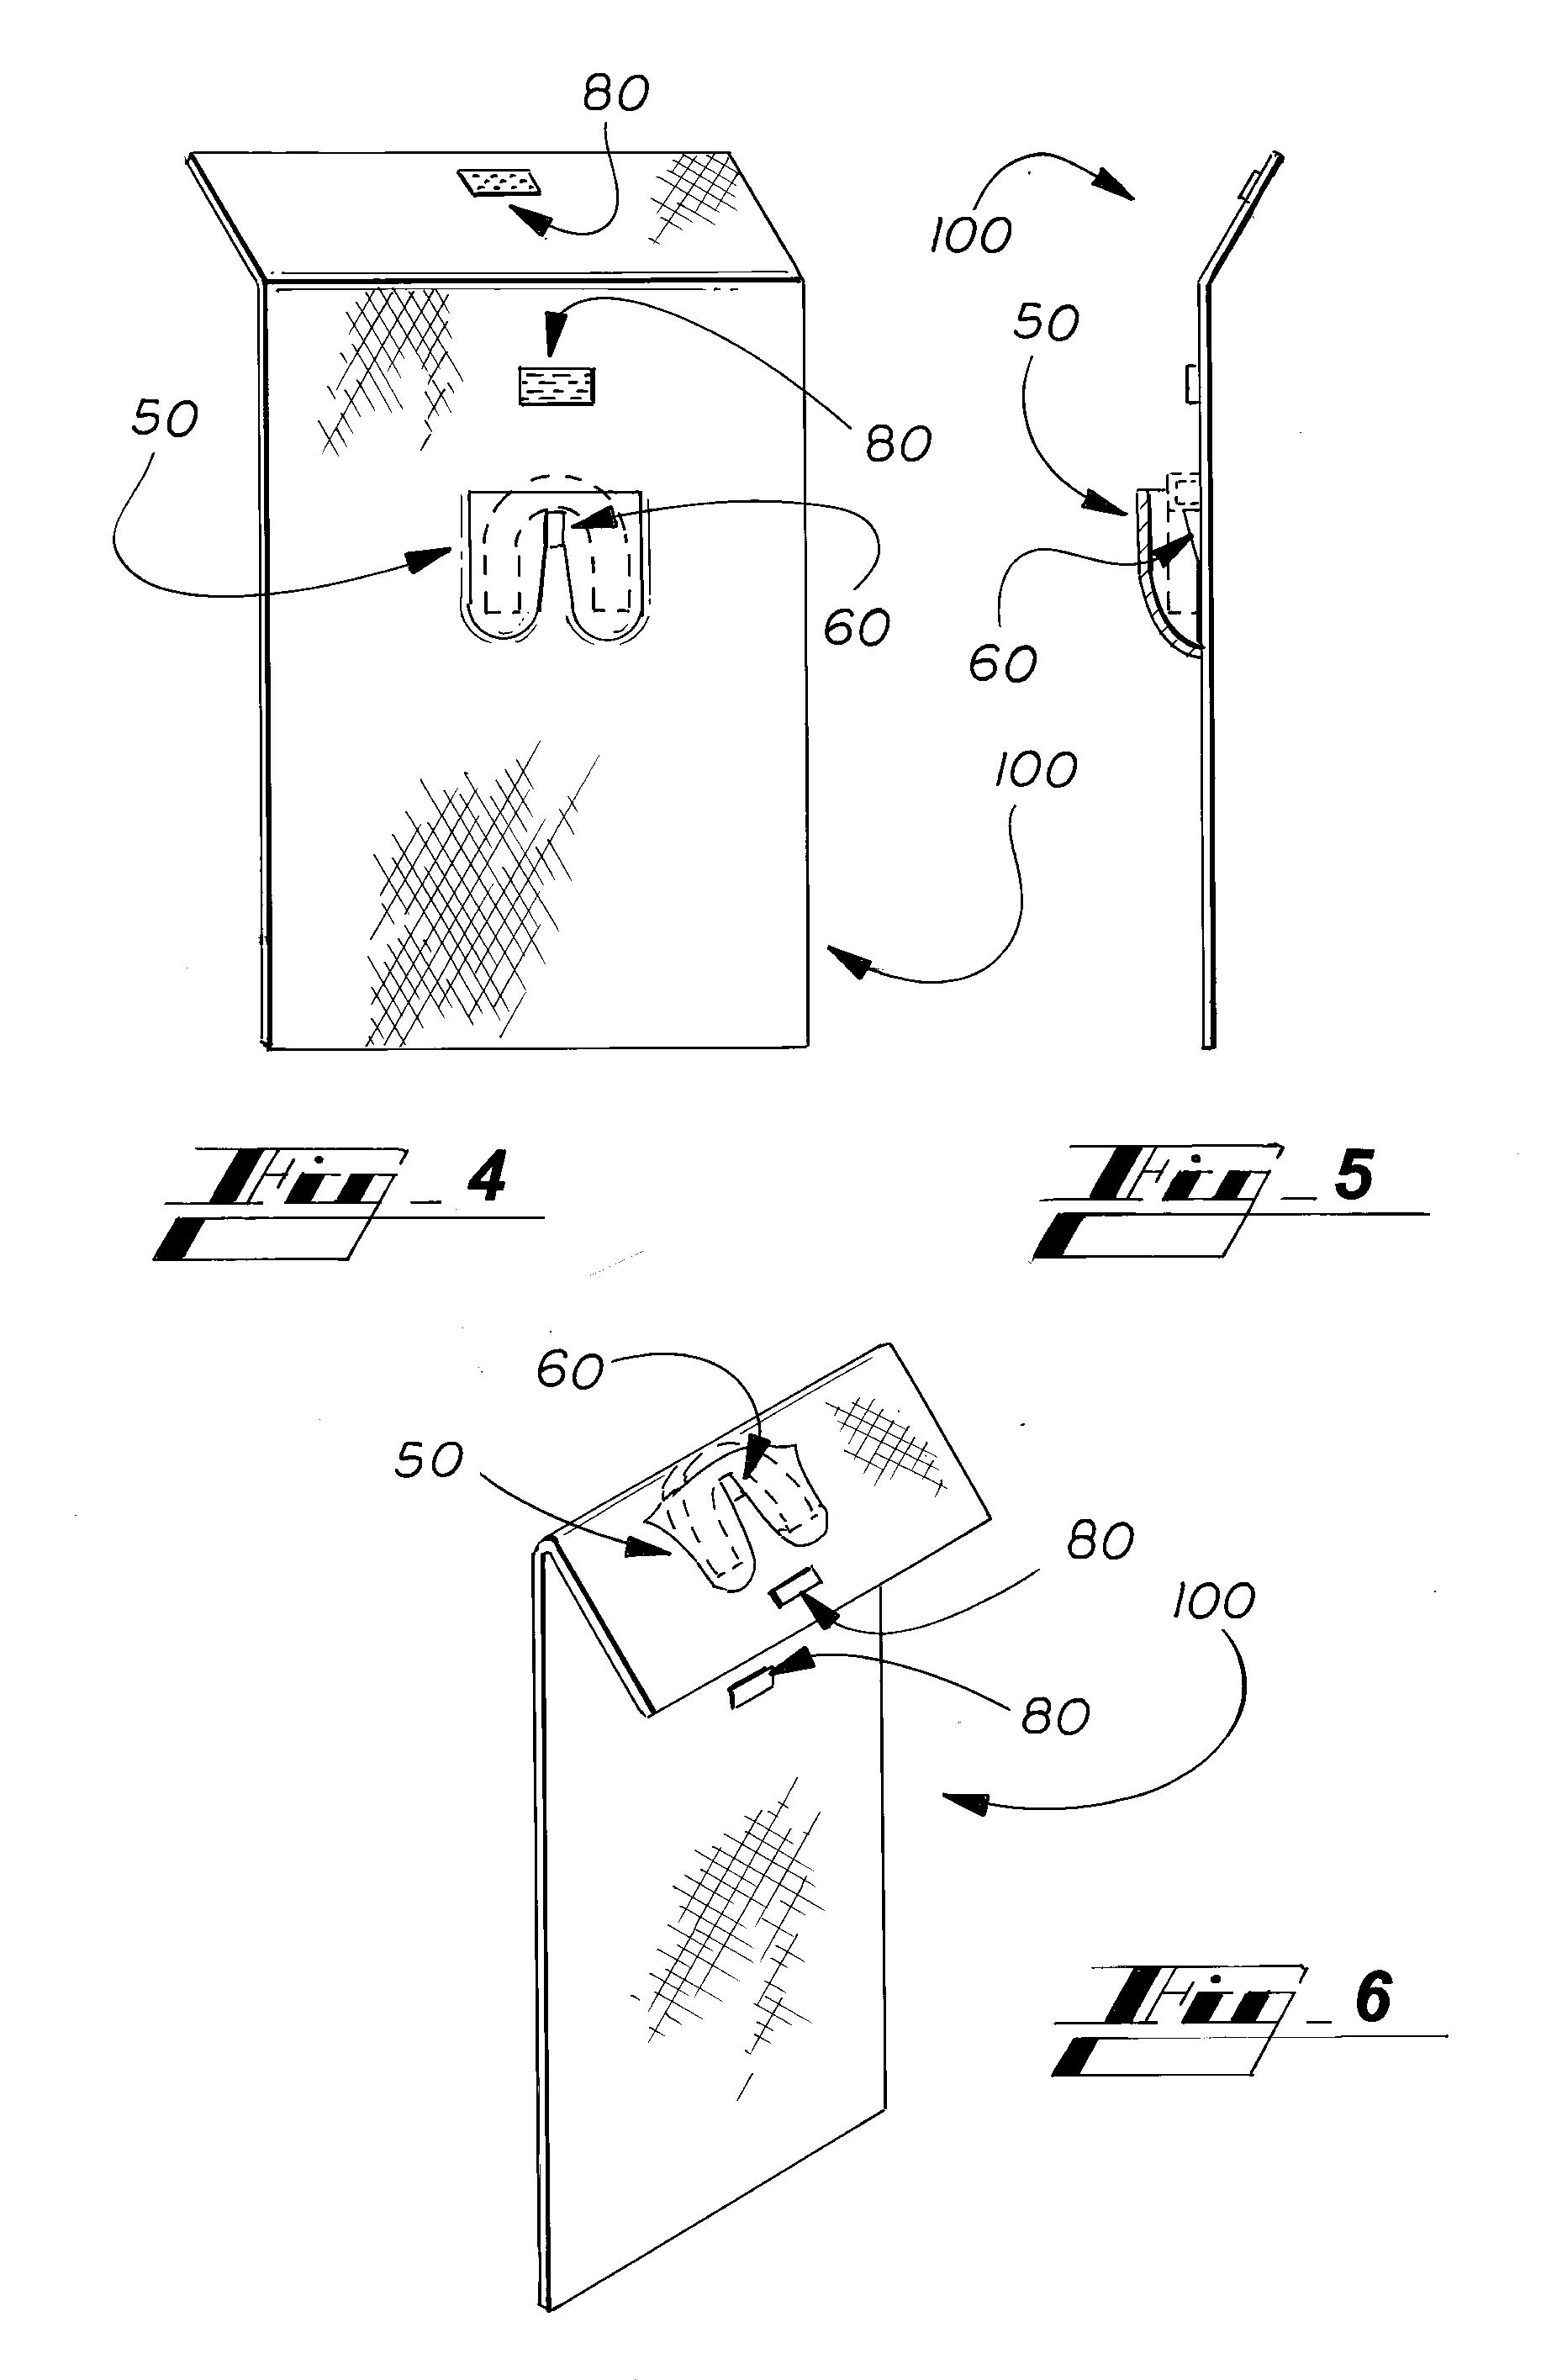 Method and apparatus for sanitarily removing sweat and protecting and carrying personal items